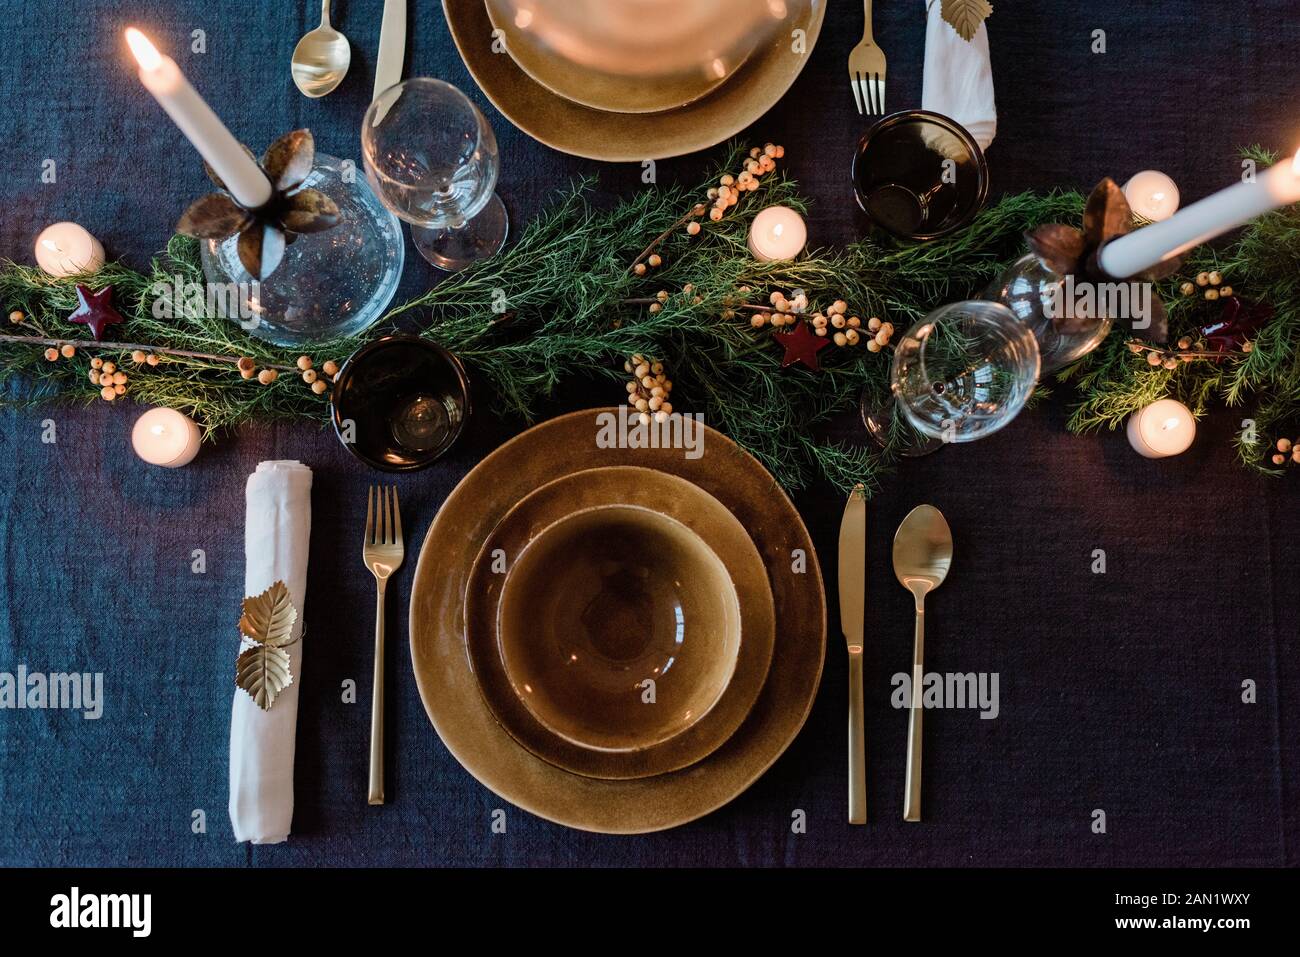 sky view of a modern dinner table setting with candles and greenery Stock Photo